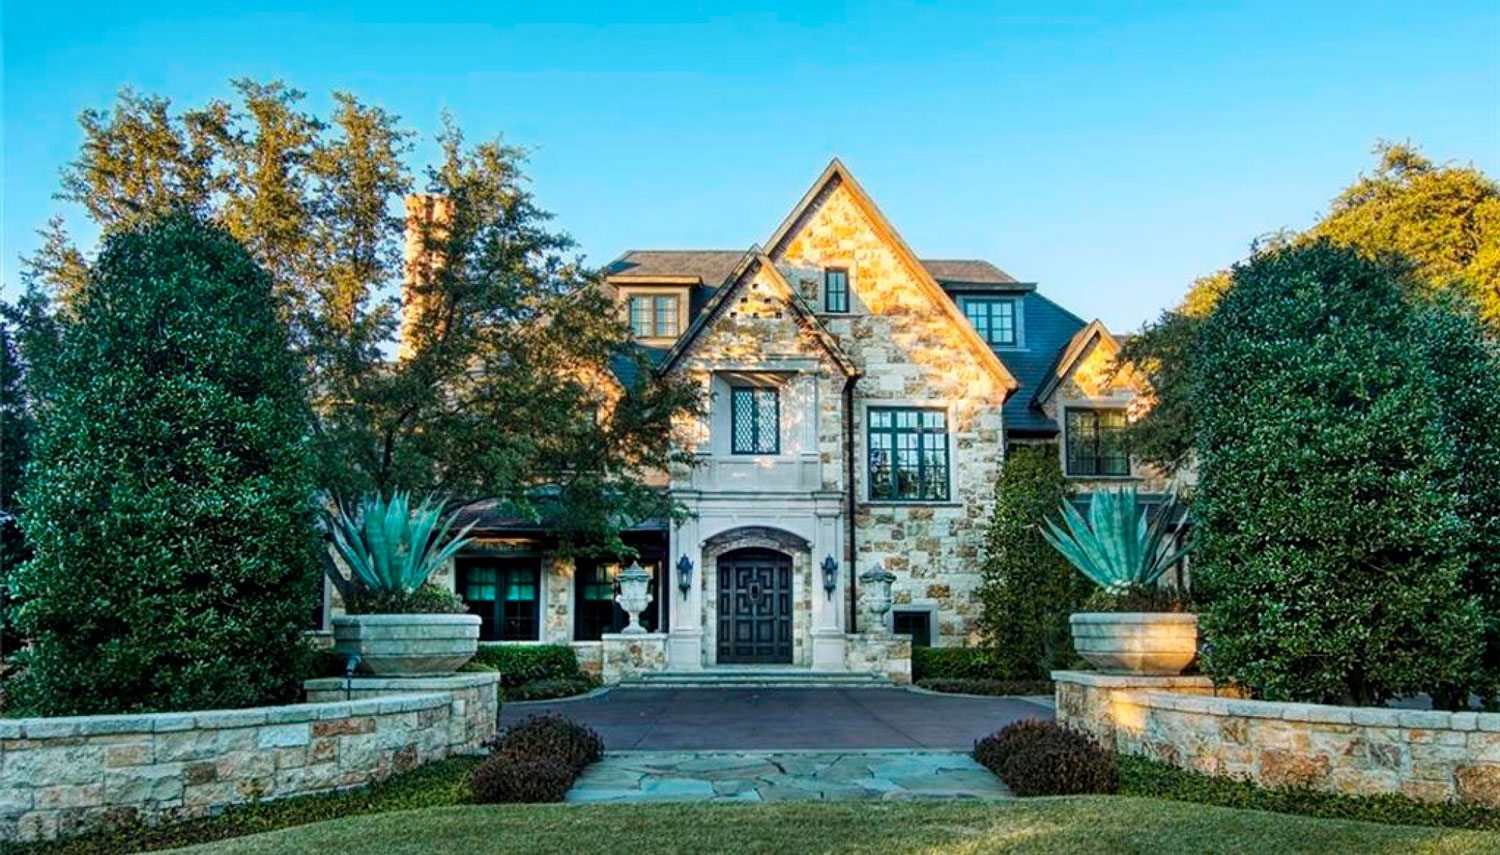 The 6 Most Expensive Homes on the Market in Dallas Galerie